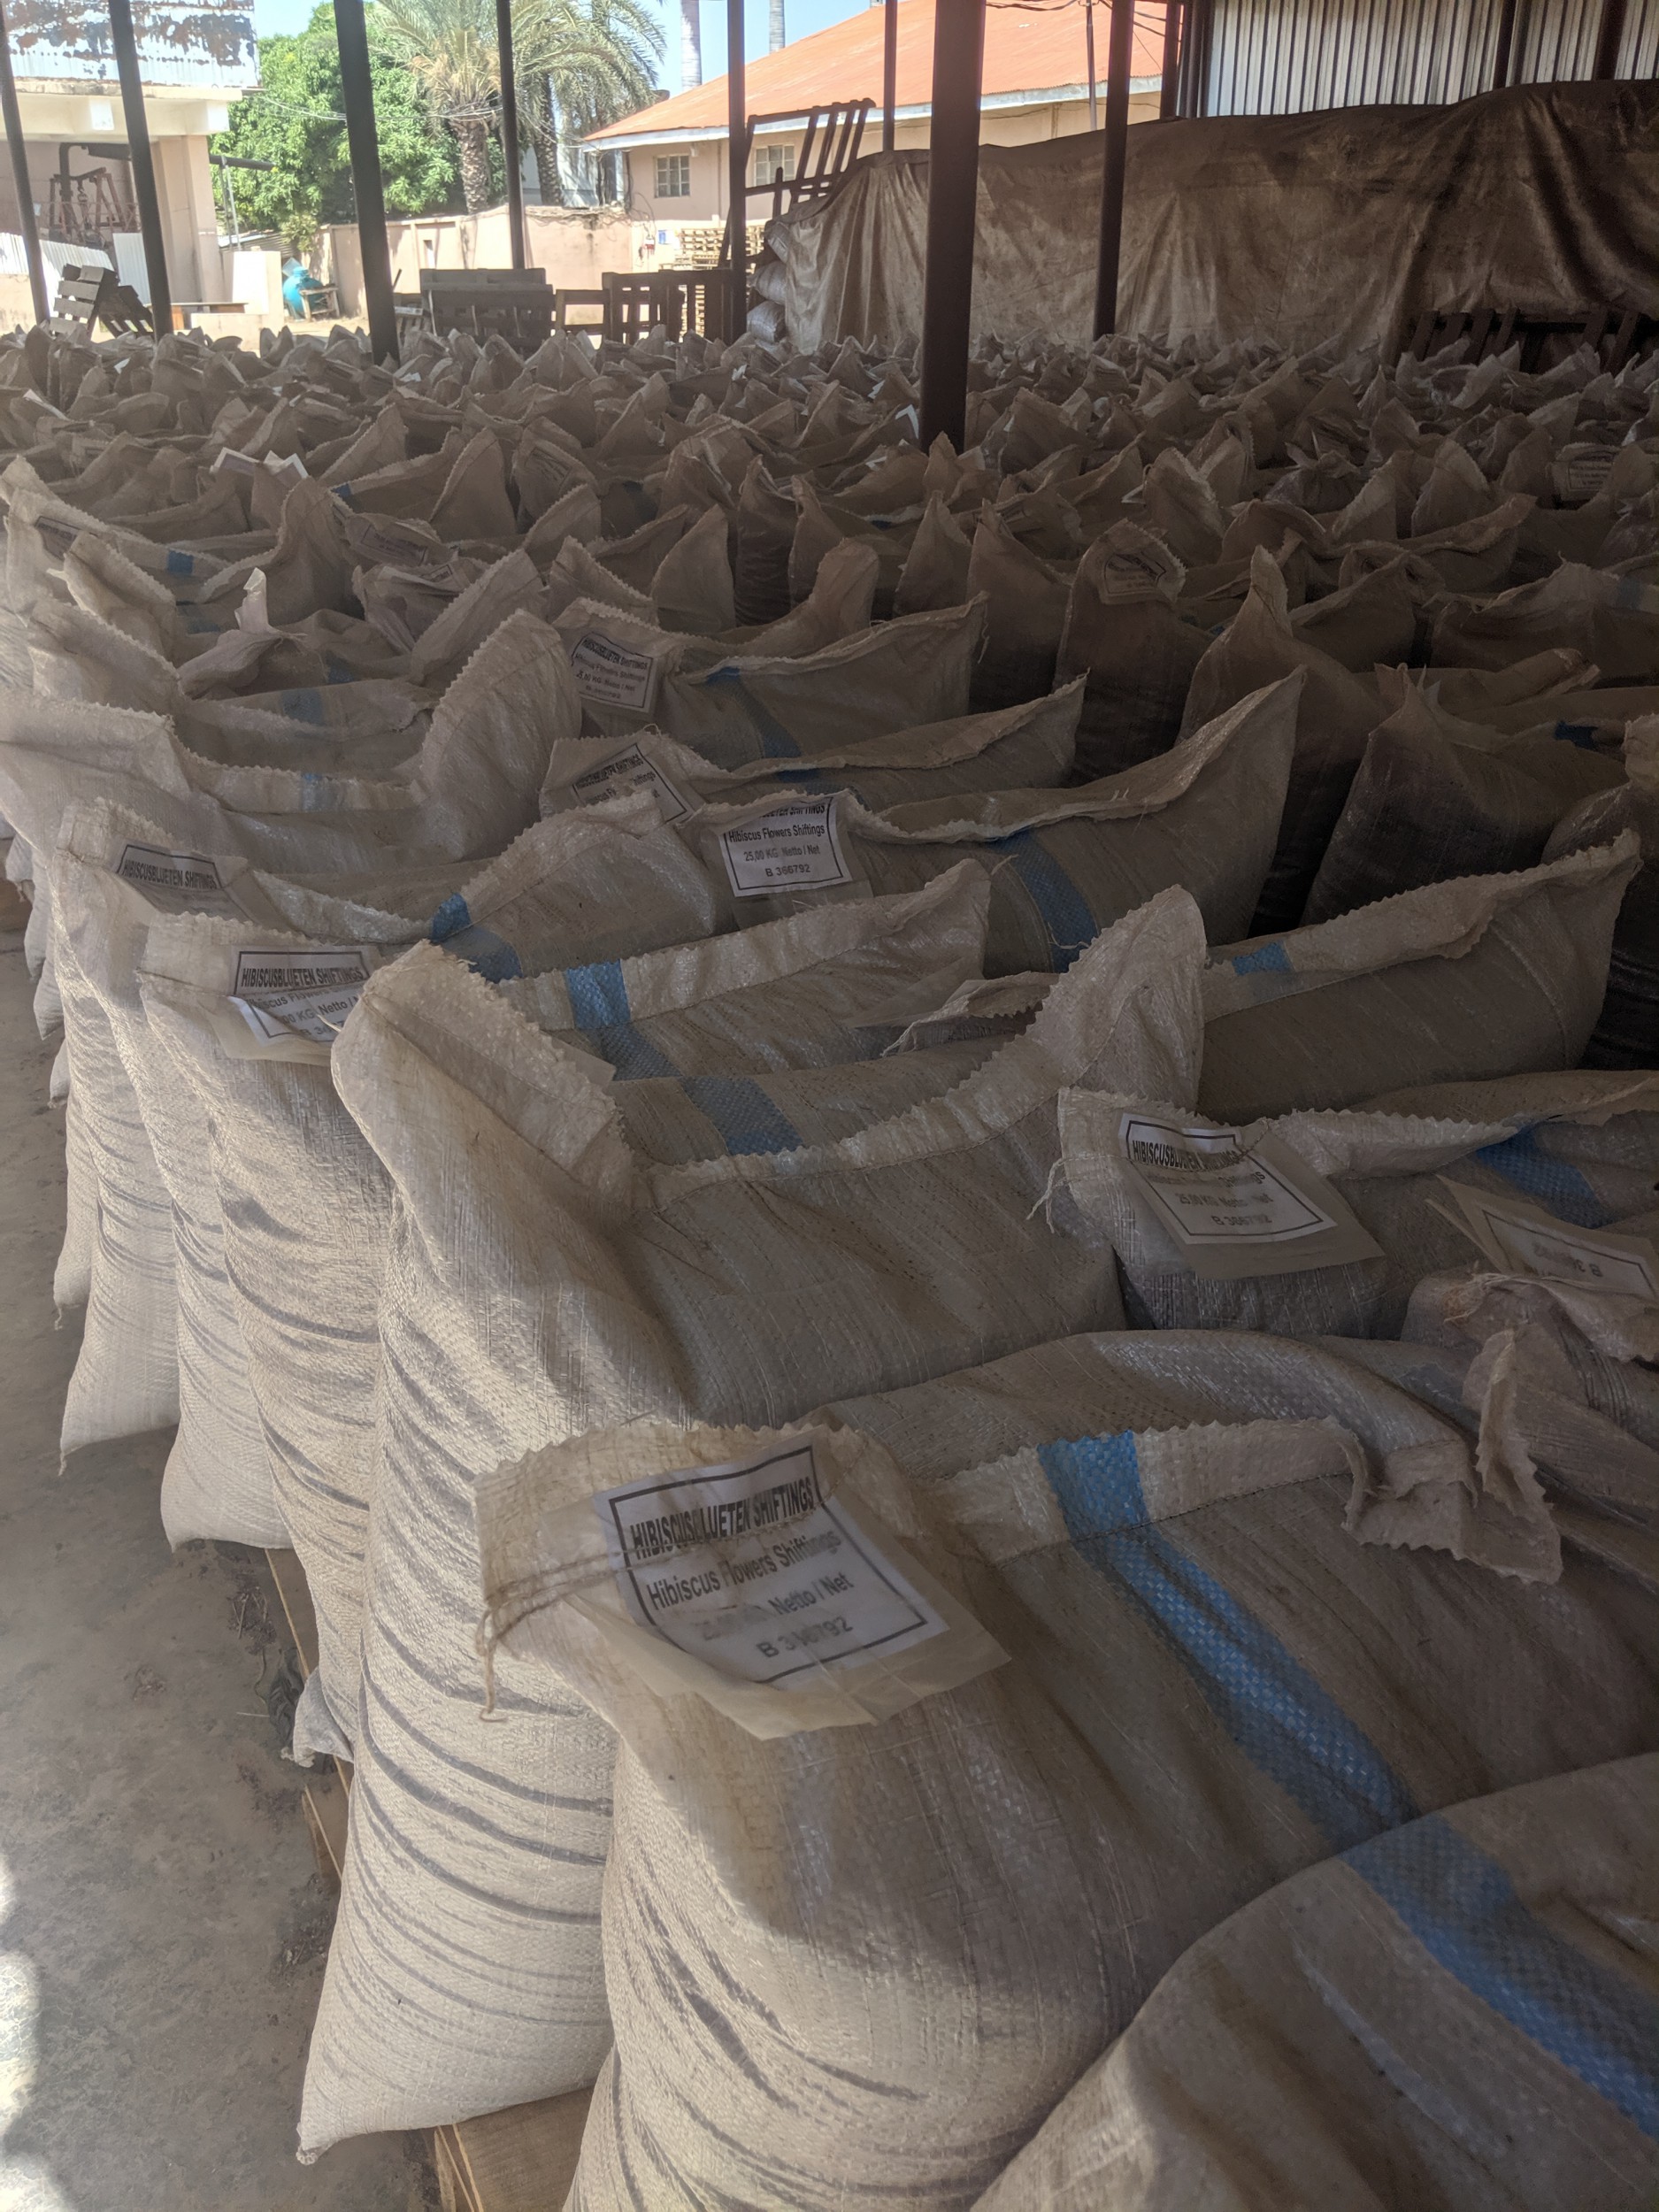 Bagged Hibiscus waiting to be transported in Kano State, Nigeria